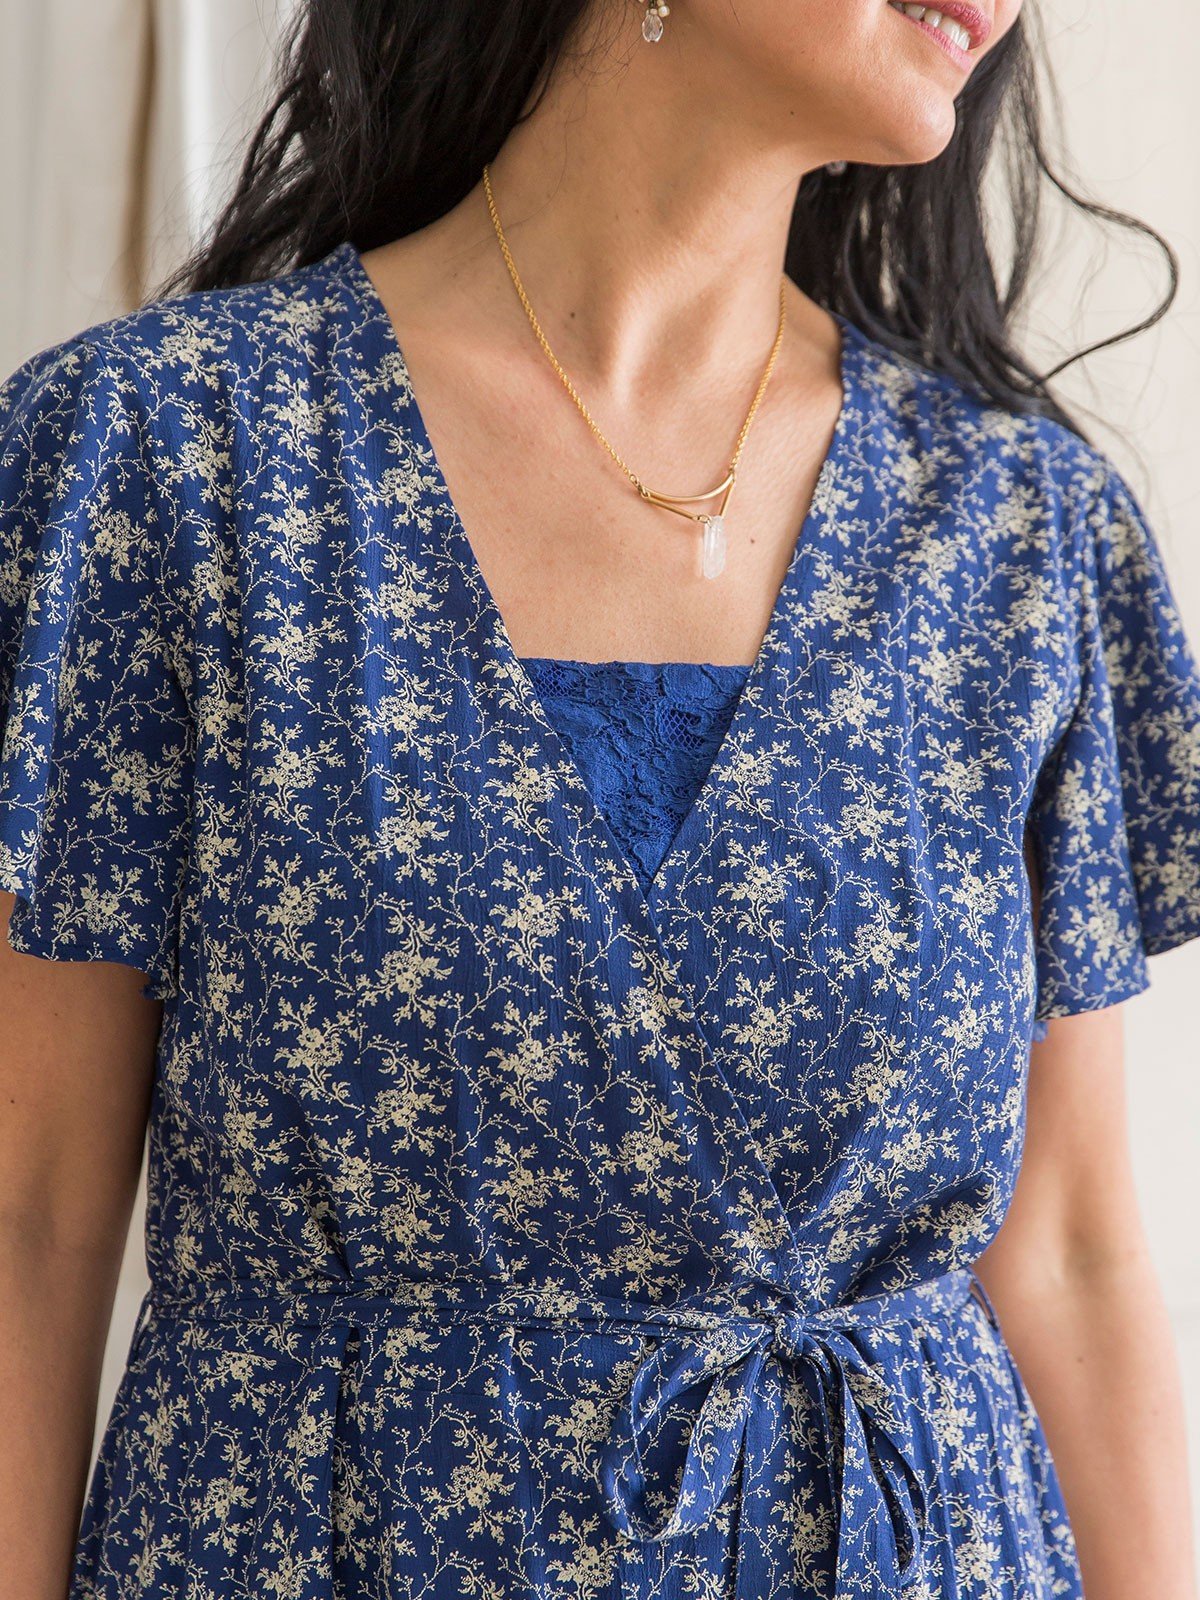 Market Dress in Navy | April Cornell - SOLD OUT